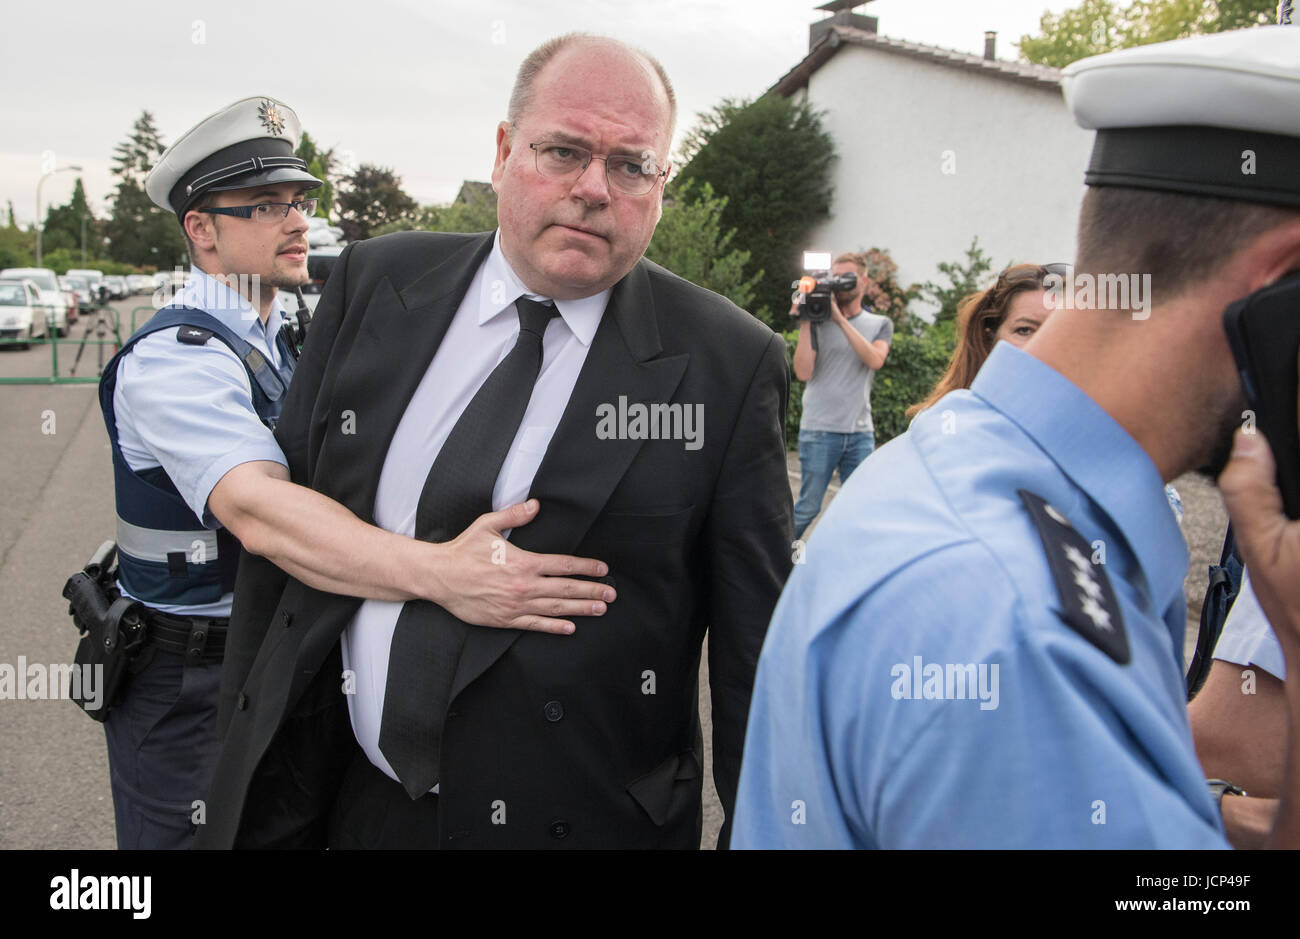 Oggersheim, Germany. 16th June, 2017. Walter Kohl (C), son of former German Chancellor Helmut Kohl, is temporarily held up by members of the German police as the area surrounding the residence of his father has been cordoned off after the death of Helmut Kohl was made public, in Oggersheim, Germany, 16 June 2017. Helmut Kohl died at the age of 87 on 16 June 2017. Photo: Boris Roessler/dpa/Alamy Live News Stock Photo